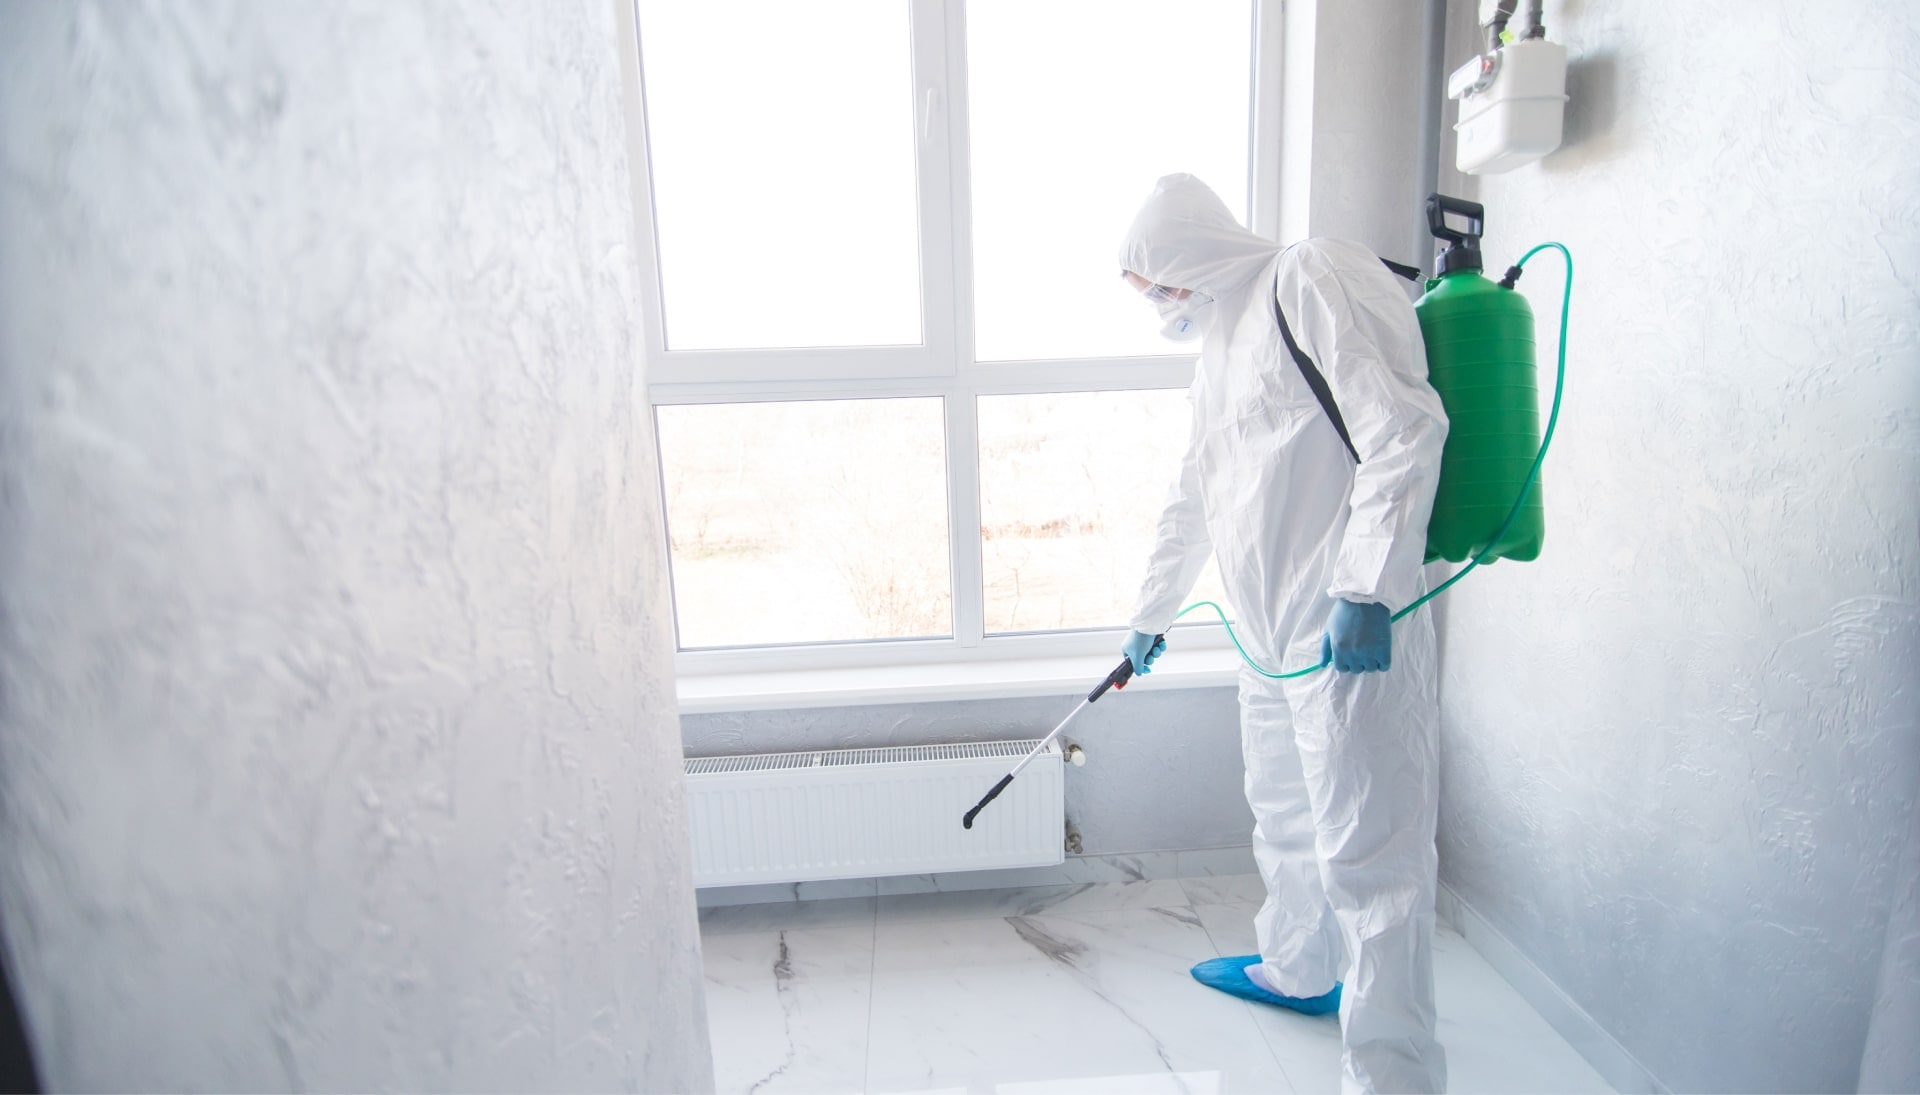 We provide the highest-quality mold inspection, testing, and removal services in the Augusta, Georgia area.